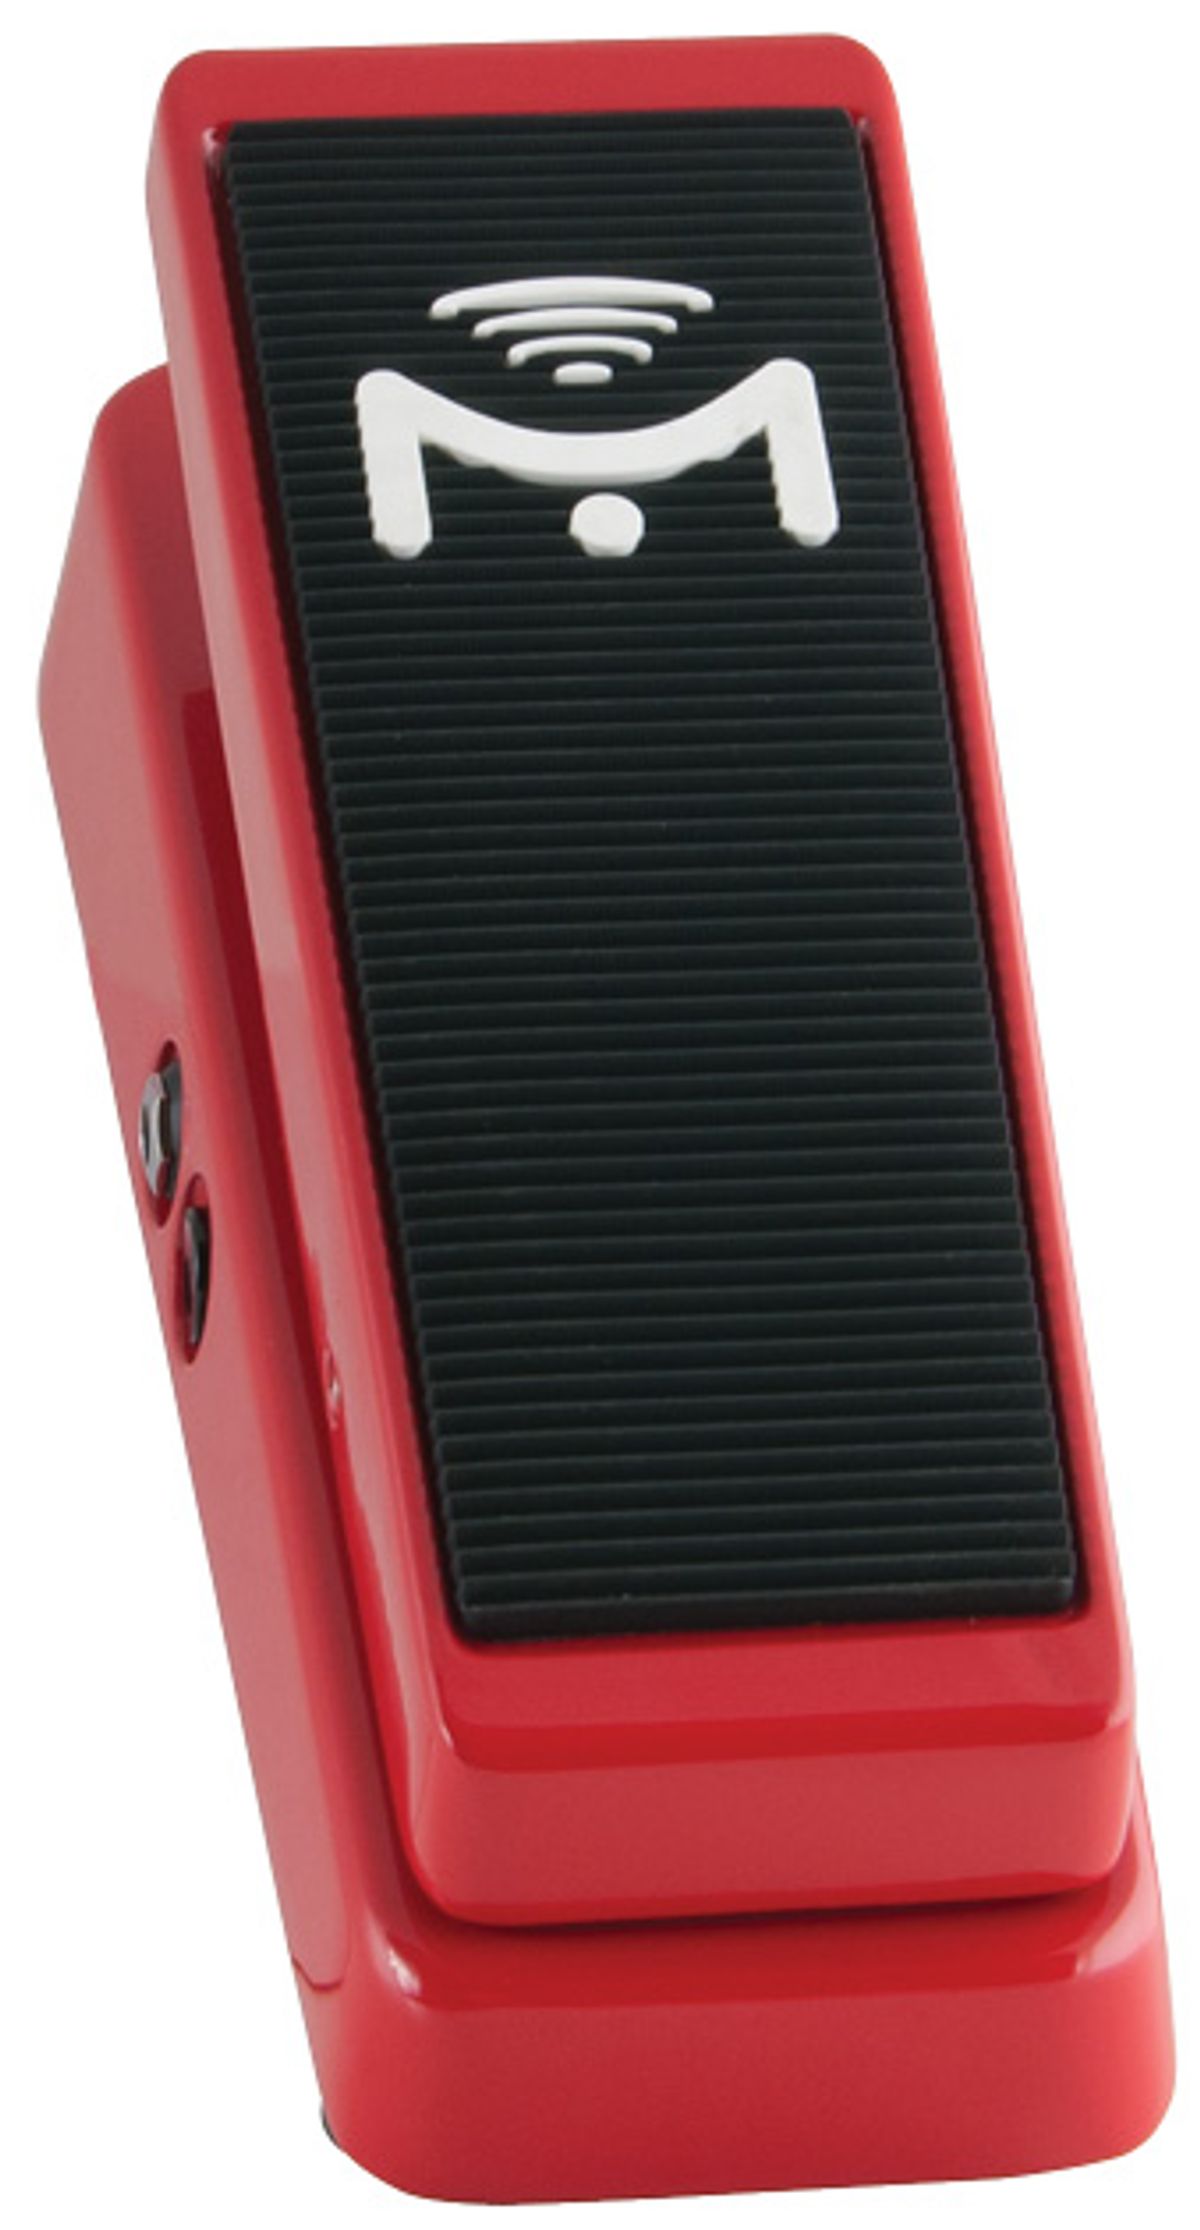 Mission Engineering VM-PRO Buffered Volume Pedal Review